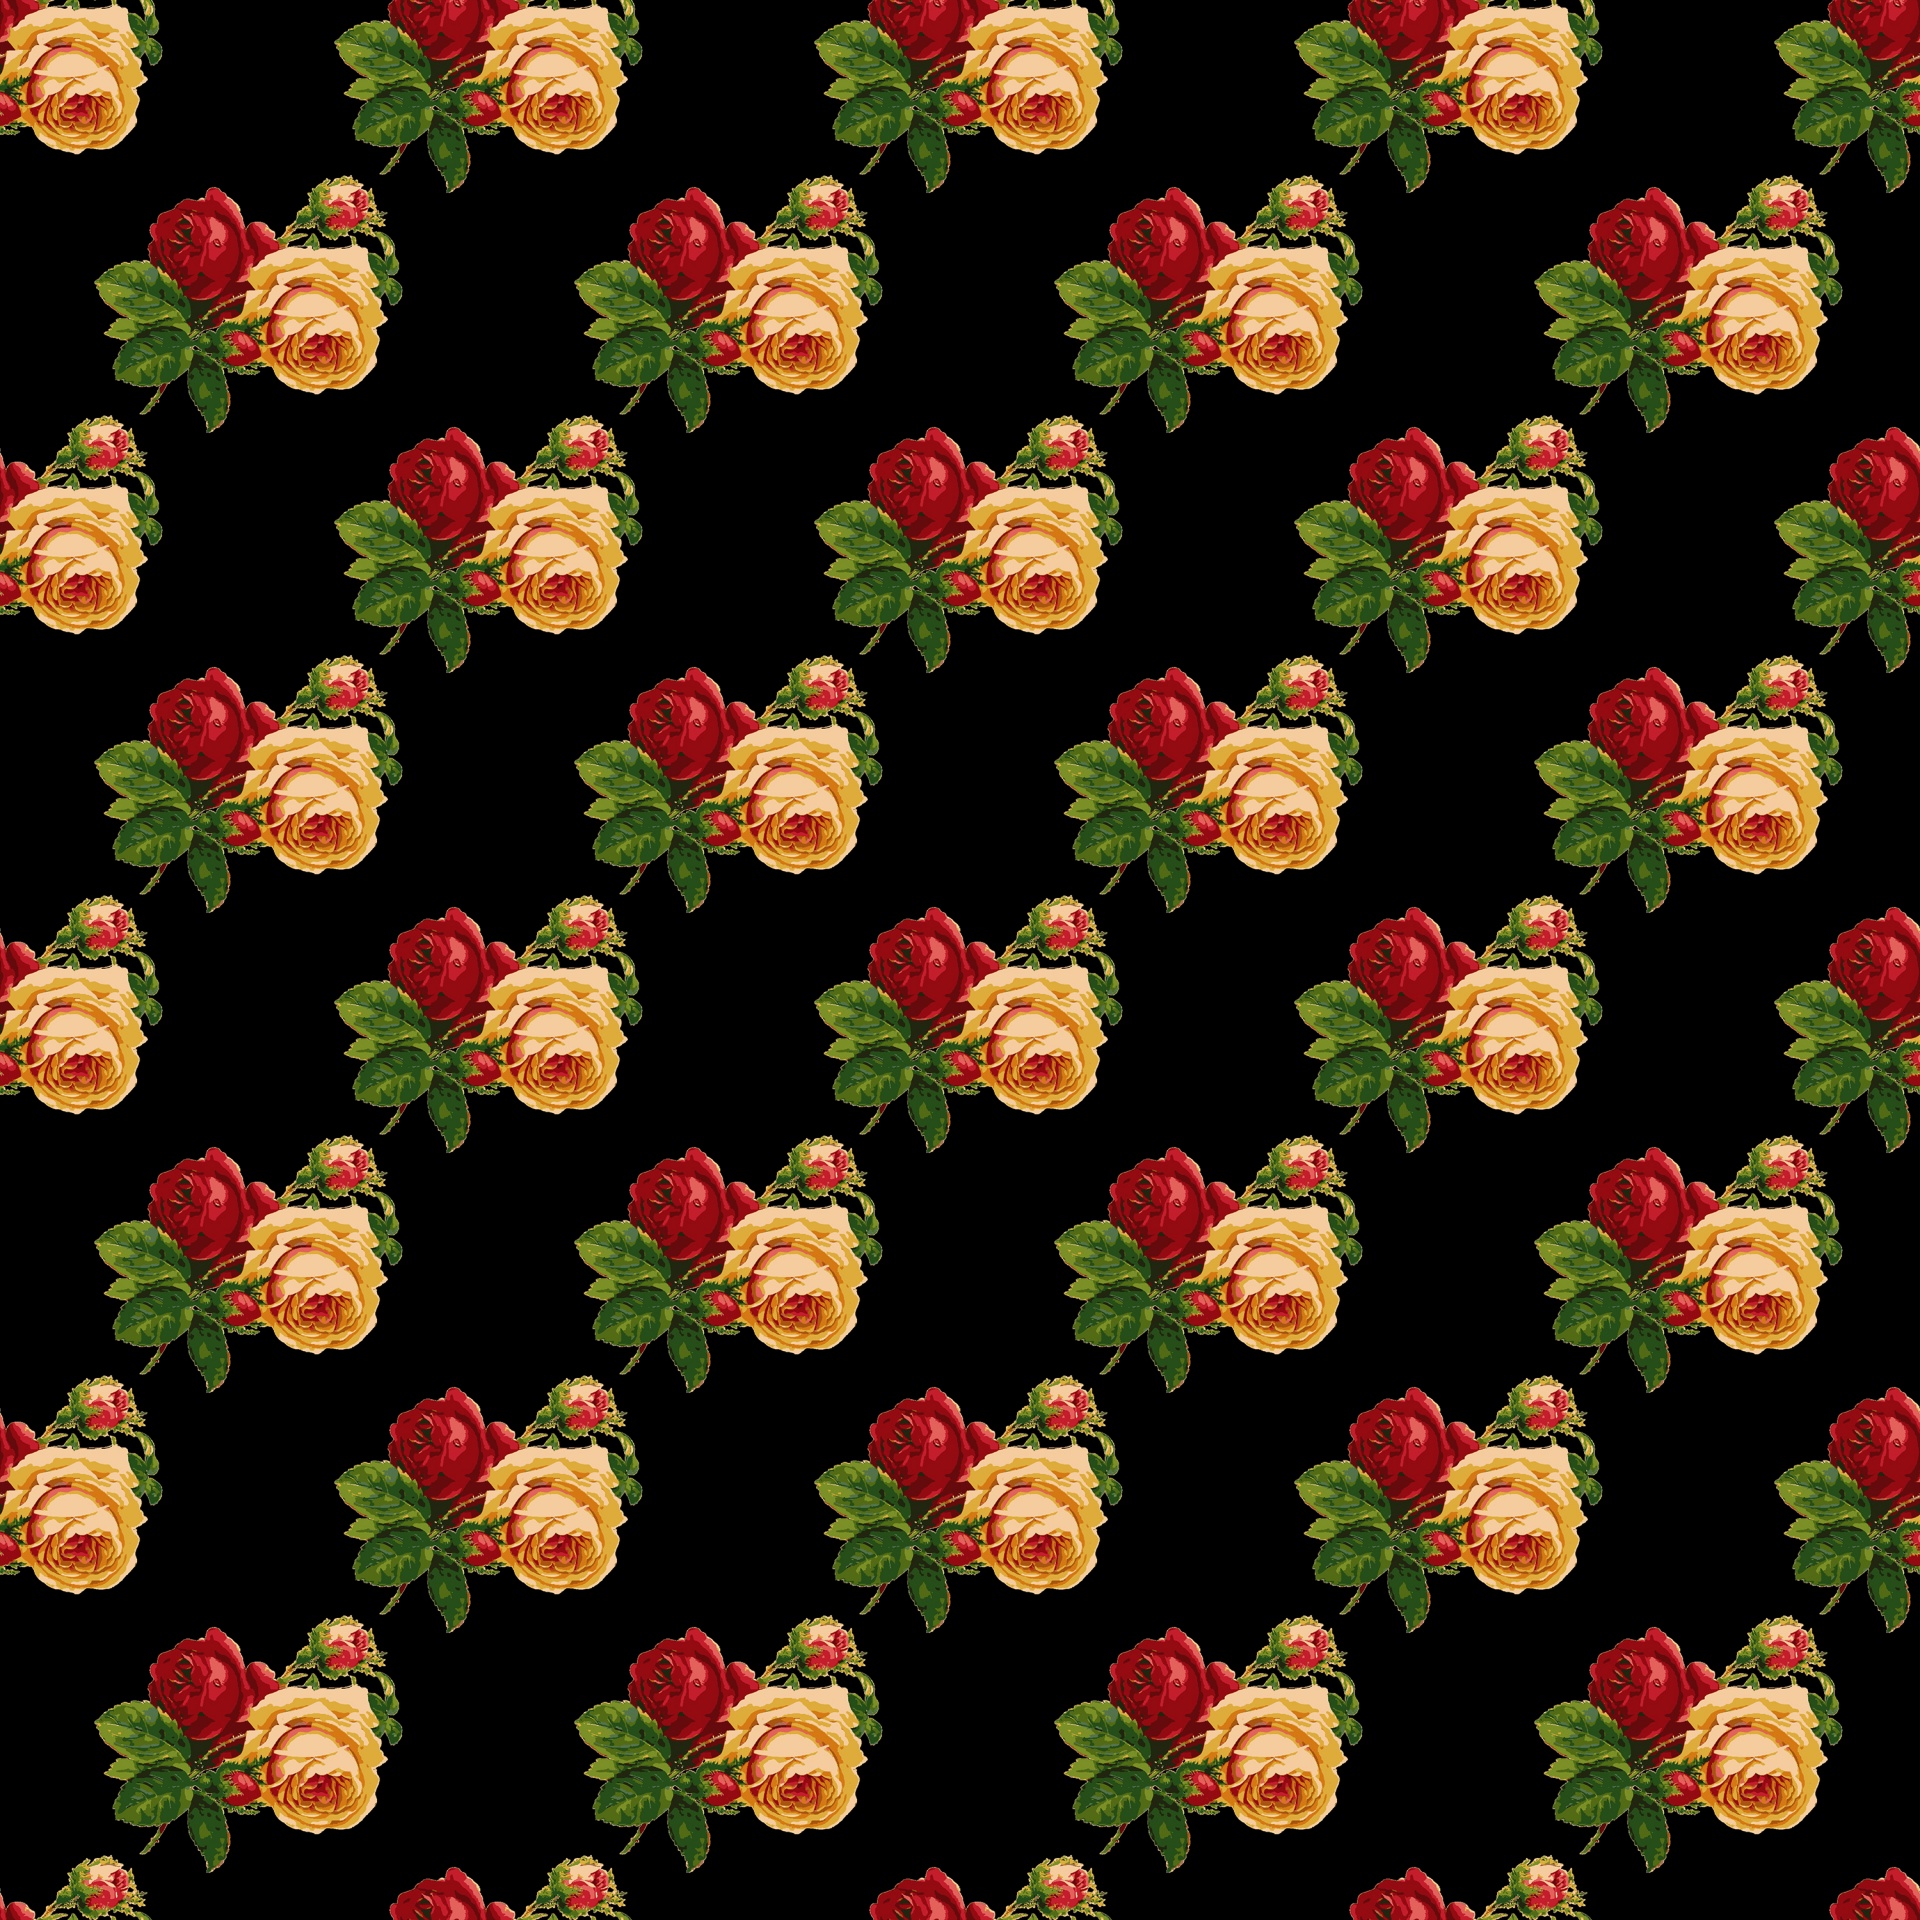 Vintage Roses Wallpaper Pattern Free Stock Photo - Public Domain Pictures